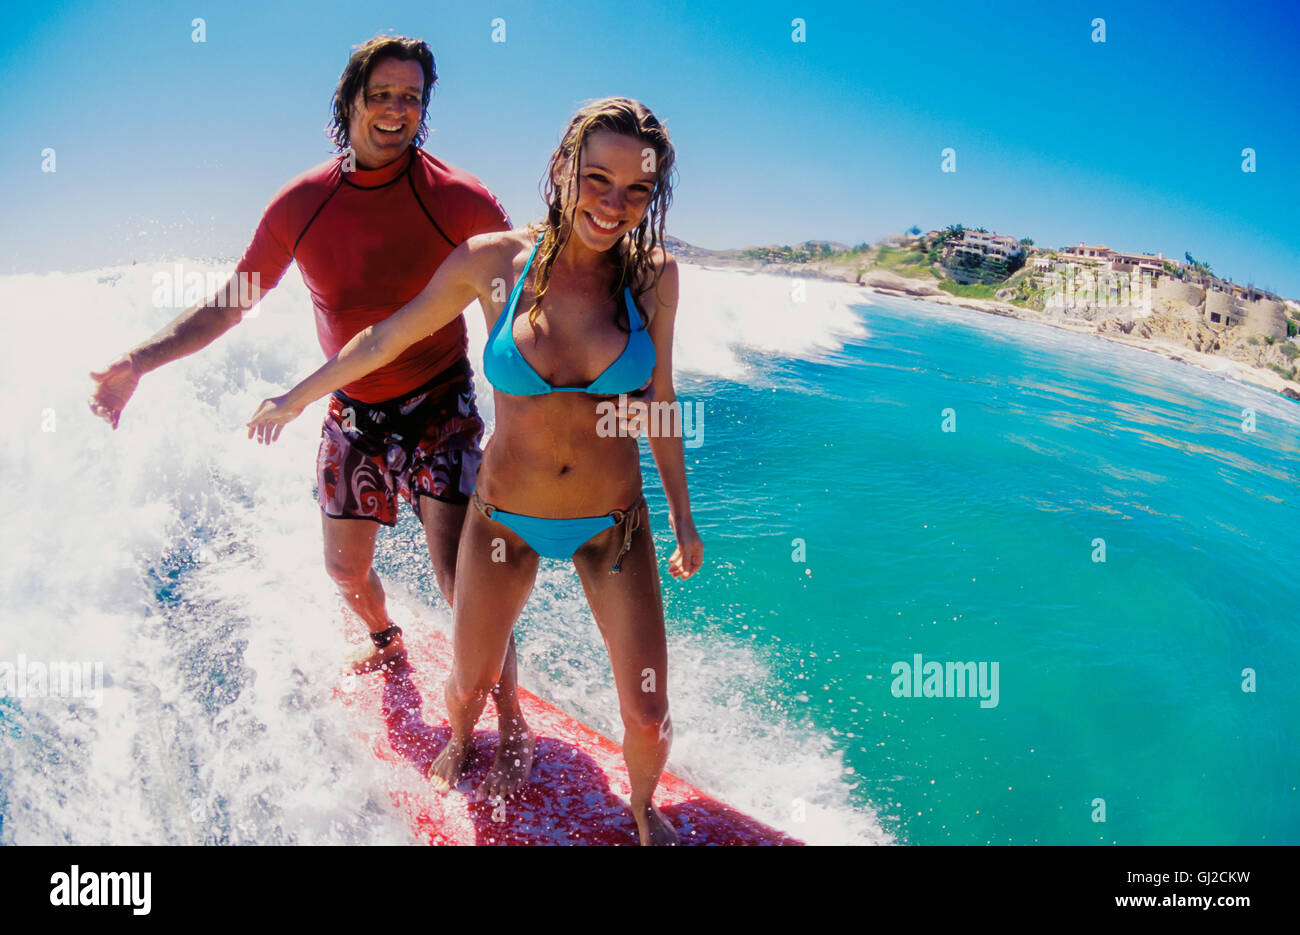 San Jose del Cabo, Los Cabos, Mexico --- Couple Tandem Surfing --- Image by © Mark A. Johnson Stock Photo